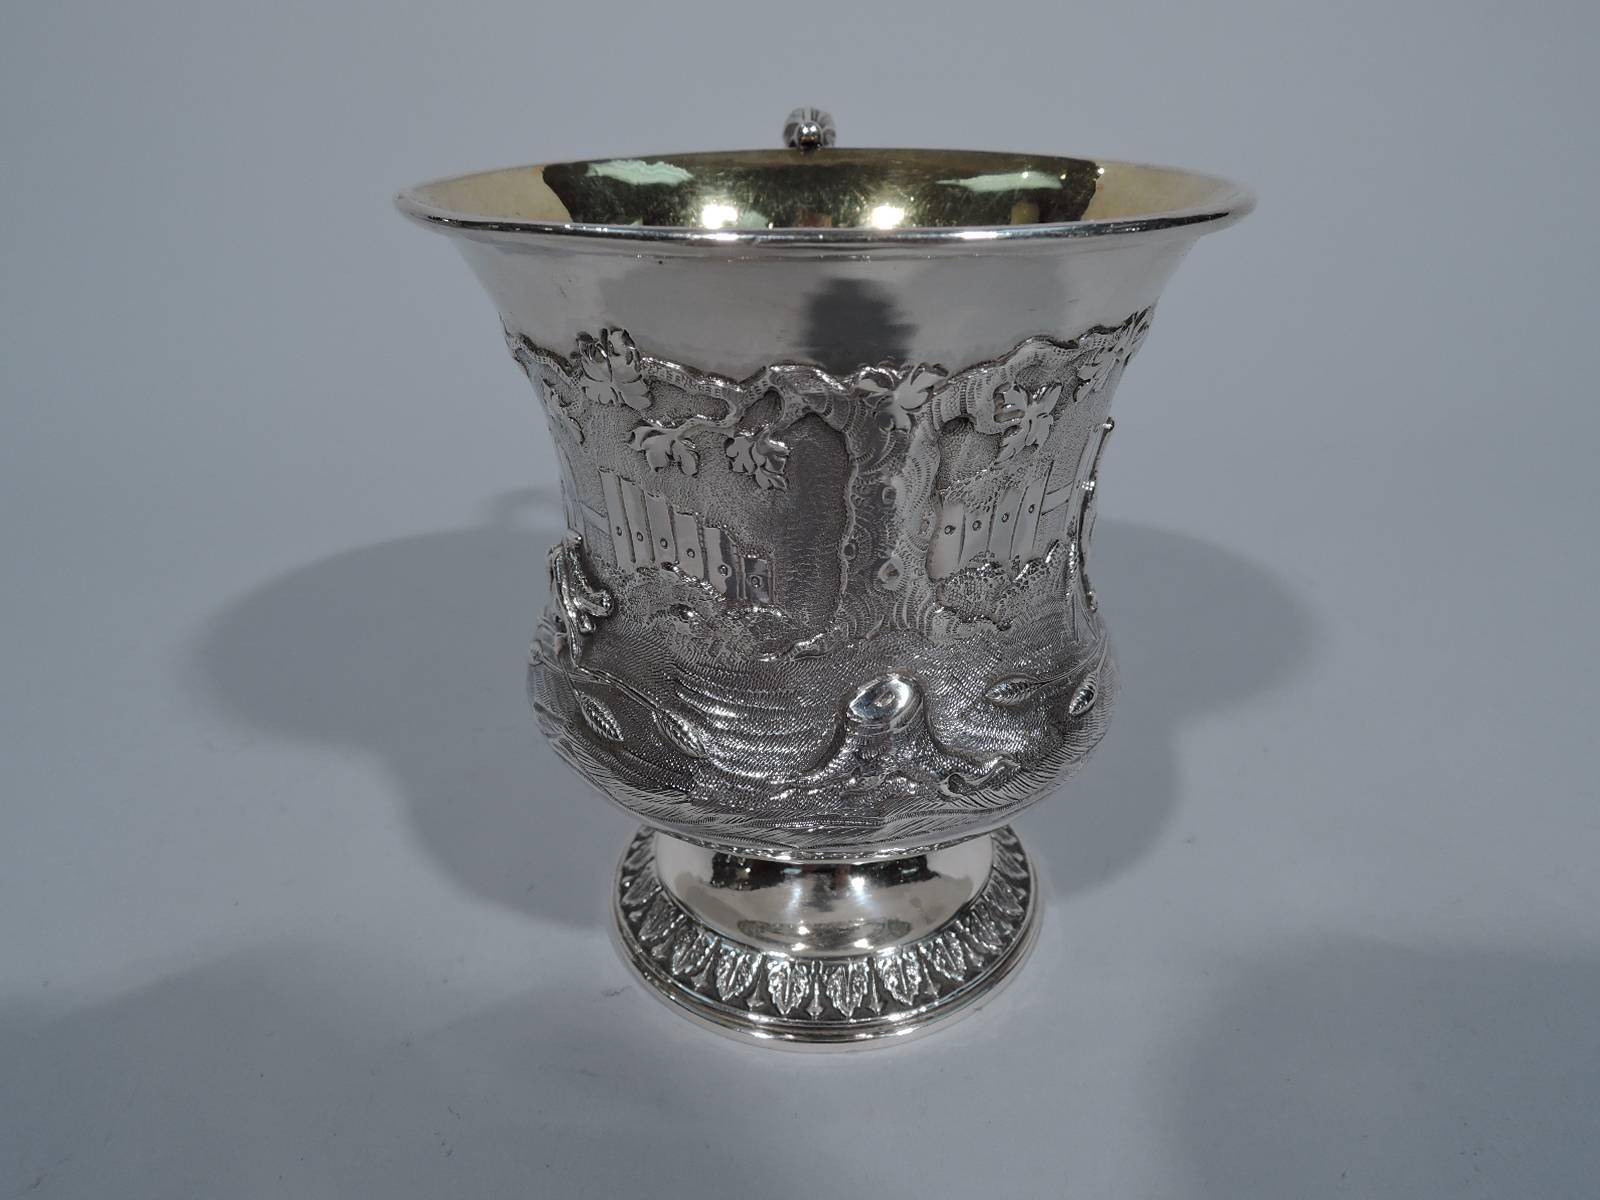 George IV sterling silver christening mug. Made in London in 1829. Baluster body with flared rim, leaf-capped s-scroll handle and raised foot. Repousse scene with fowl waddling in a fenced yard. Foot has chased leaf-and-dart border. Richly gilt